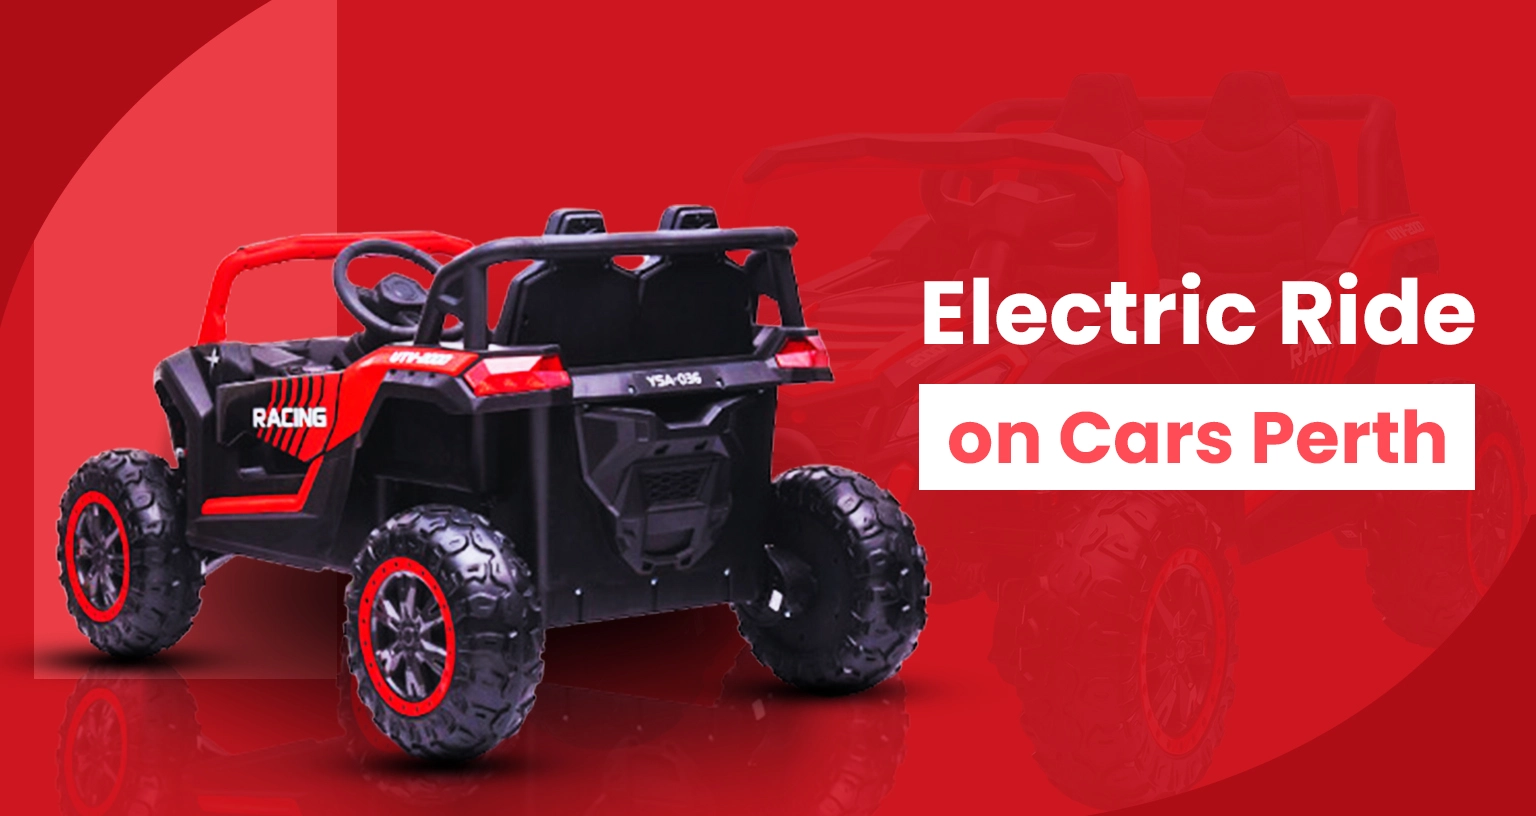 Electric Ride On Cars Perth